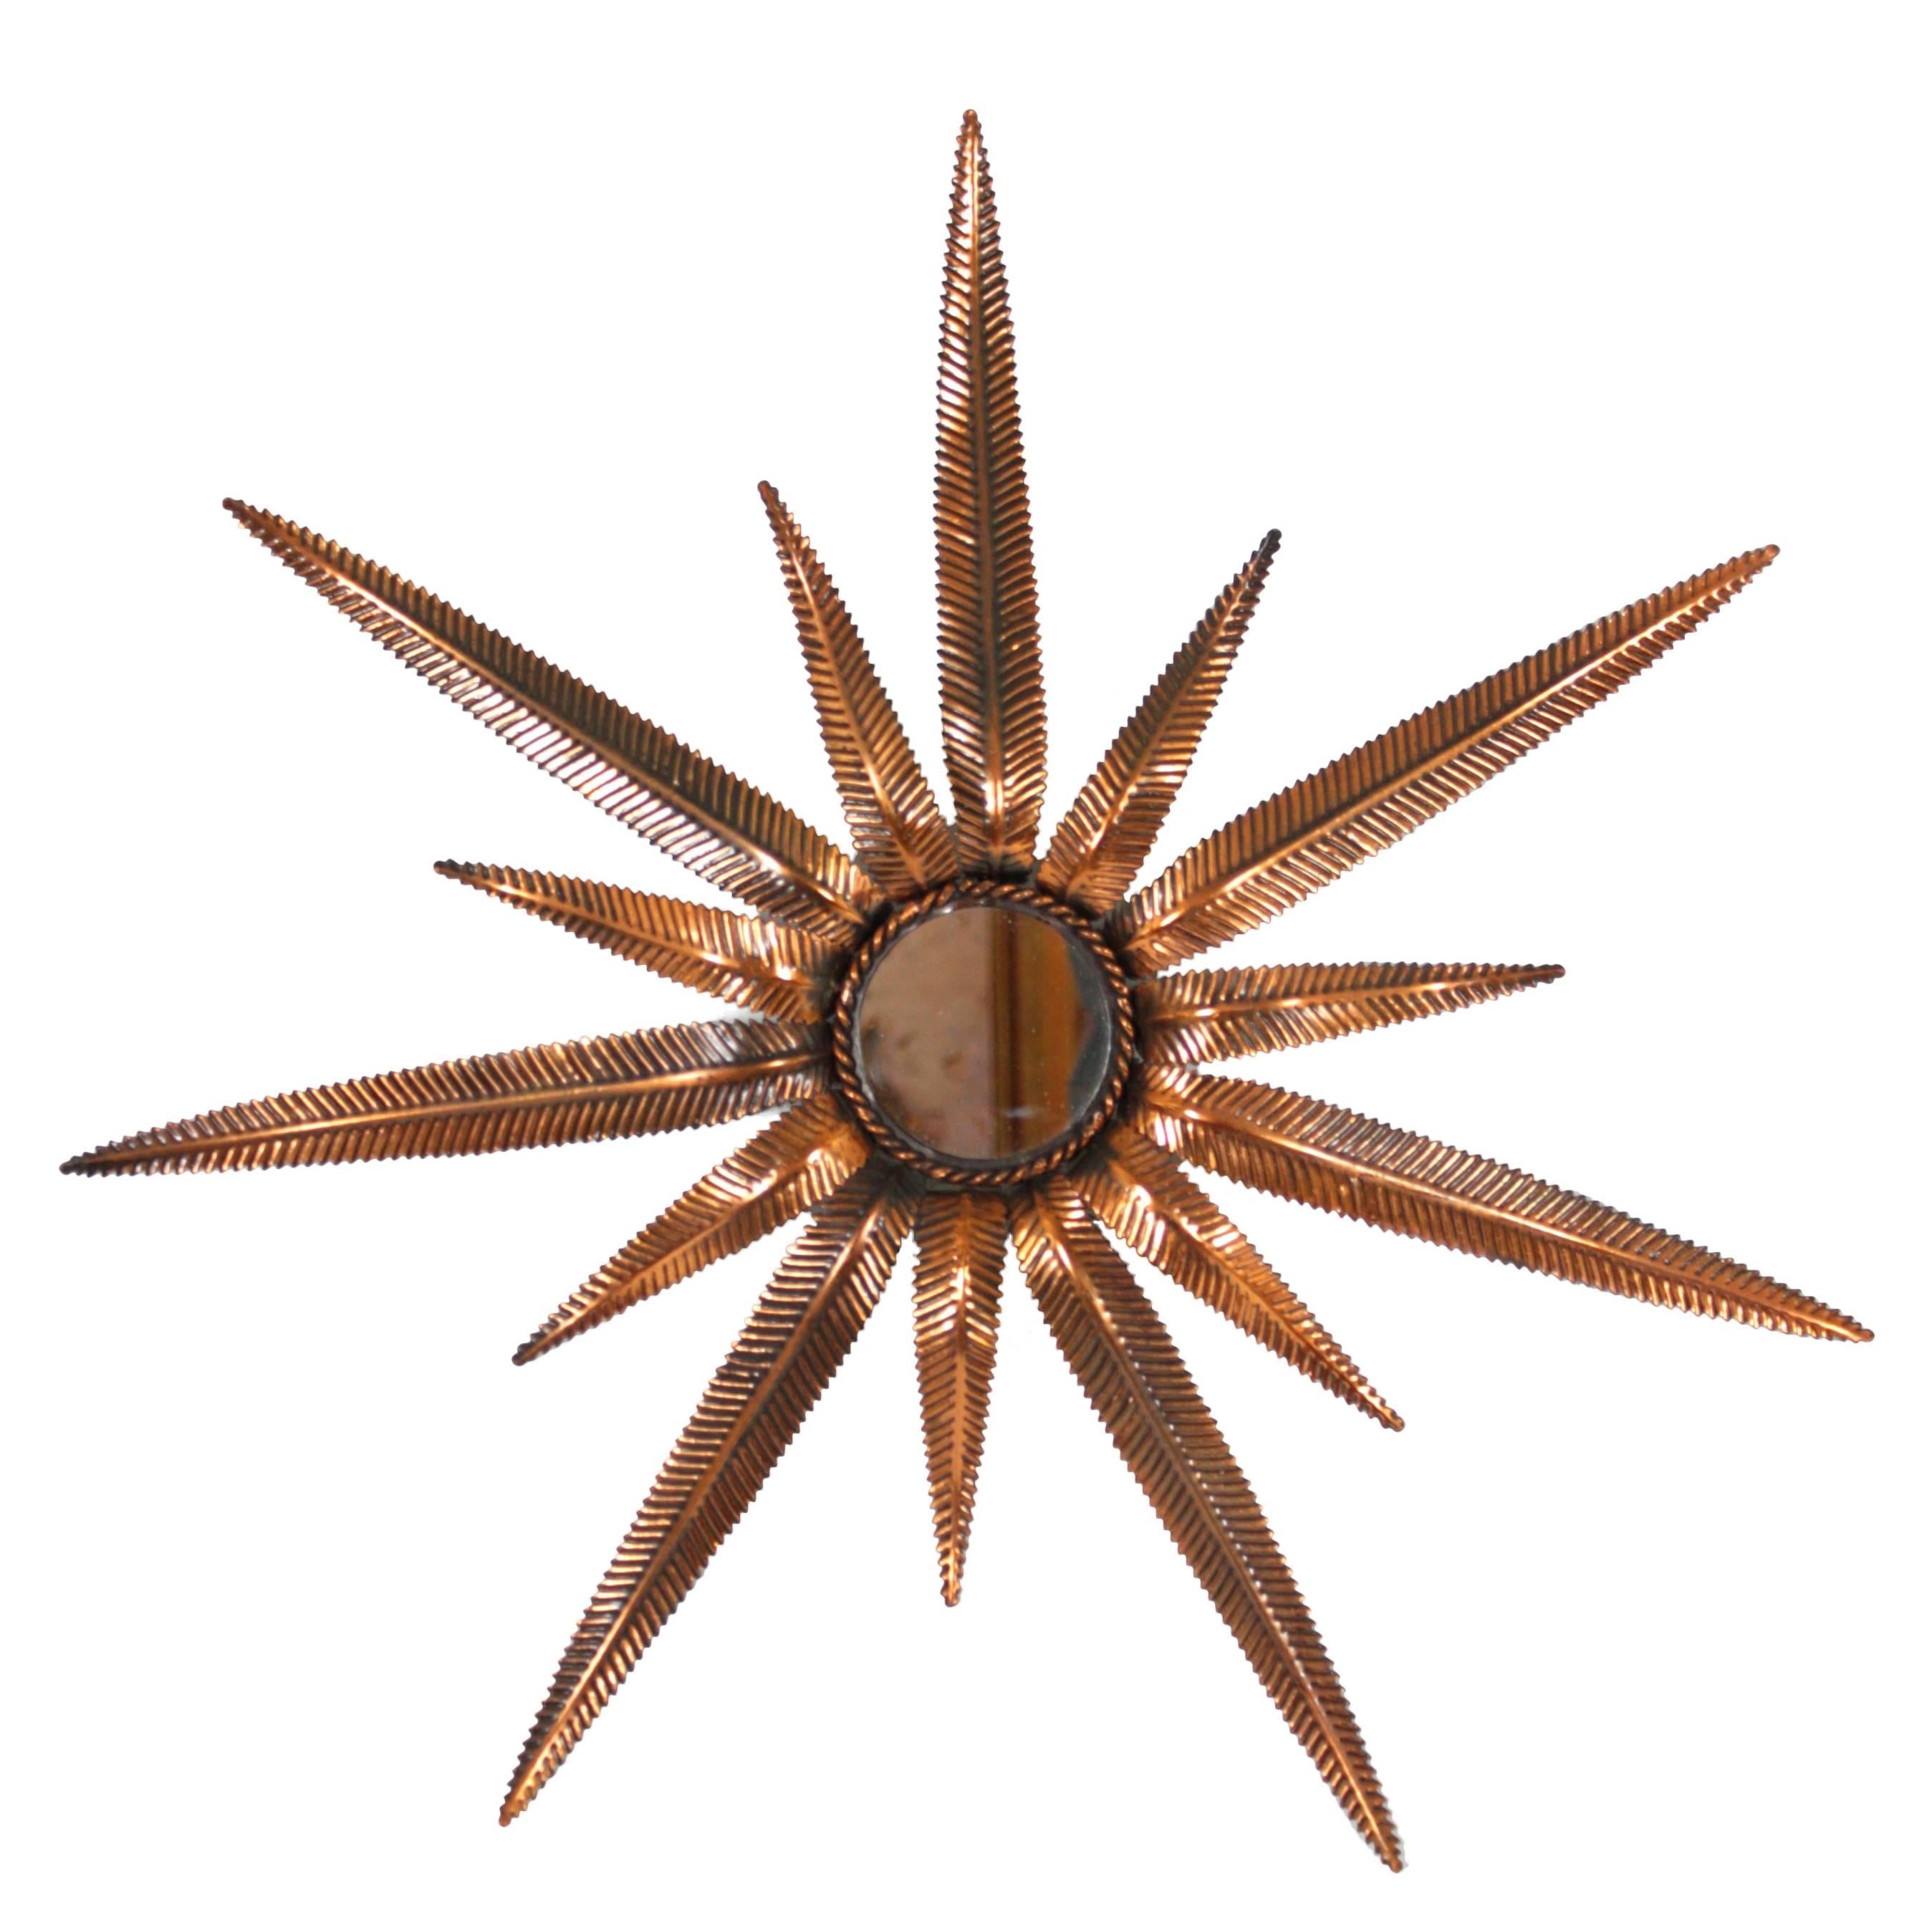 Unusual sculptural starburst mirror made in copper with two size of leaves. Each leave has an engraved decoration. Gorgeous original patina.
Made in Spain, circa 1950.

More sunburst mirrors and other kind of mirrors are available.
Please kindly